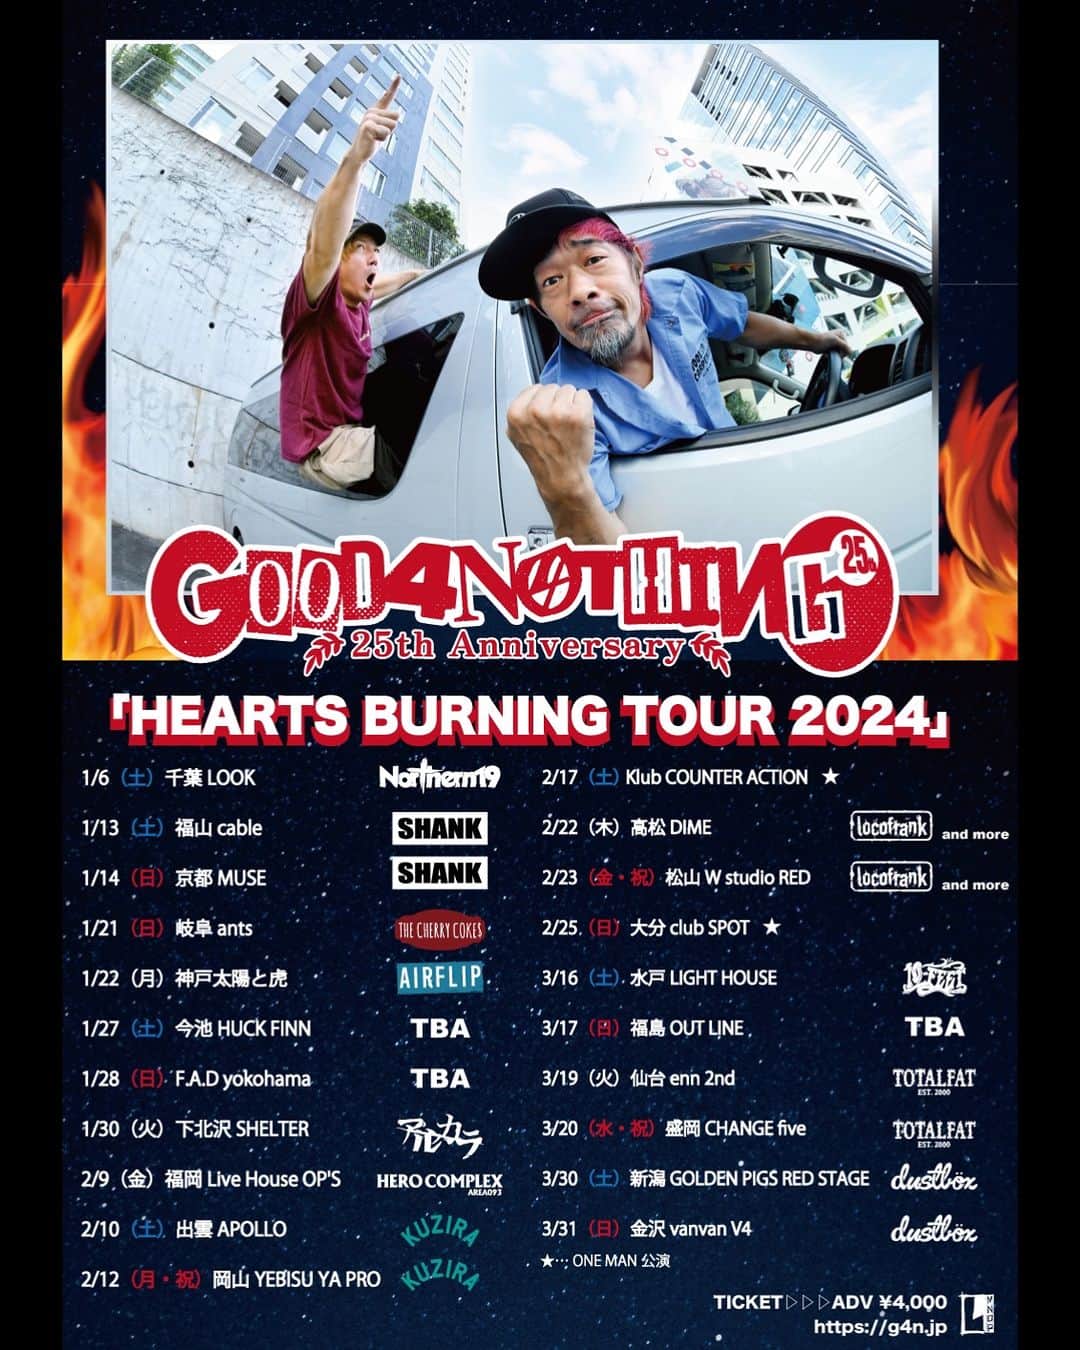 SHANKのインスタグラム：「【LIVE】  GOOD4NOTHING "HEARTS BURNING TOUR 2024" 出演決定！  2024/1/13(土) 広島 福山Cable 2024/1/14(日) 京都 KYOTO MUSE w/ GOOD4NOTHING  [e+プレオーダー受付] 受付期間：12/11(月) 23:59まで 受付URL：https://eplus.jp/good4nothing/  #SHANK #SHANK095 #SHANK095JPN」